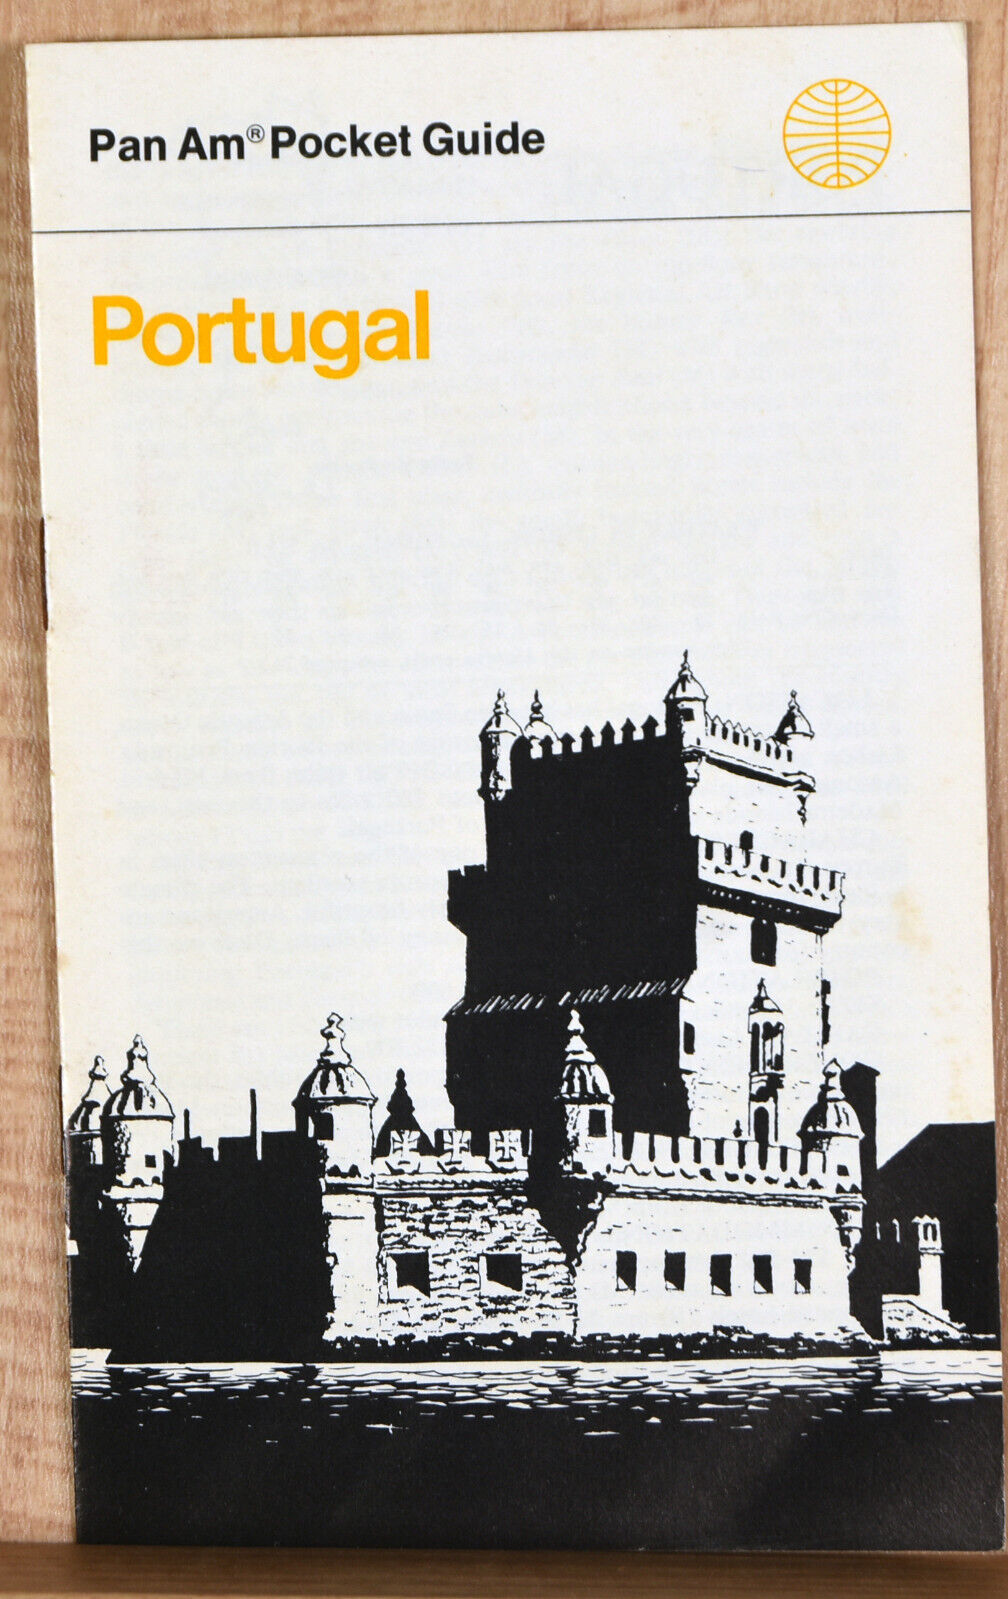 1972 Booklet Pamphlet PanAm Airlines Pocket Guide Portugal Clubs Food Madeira